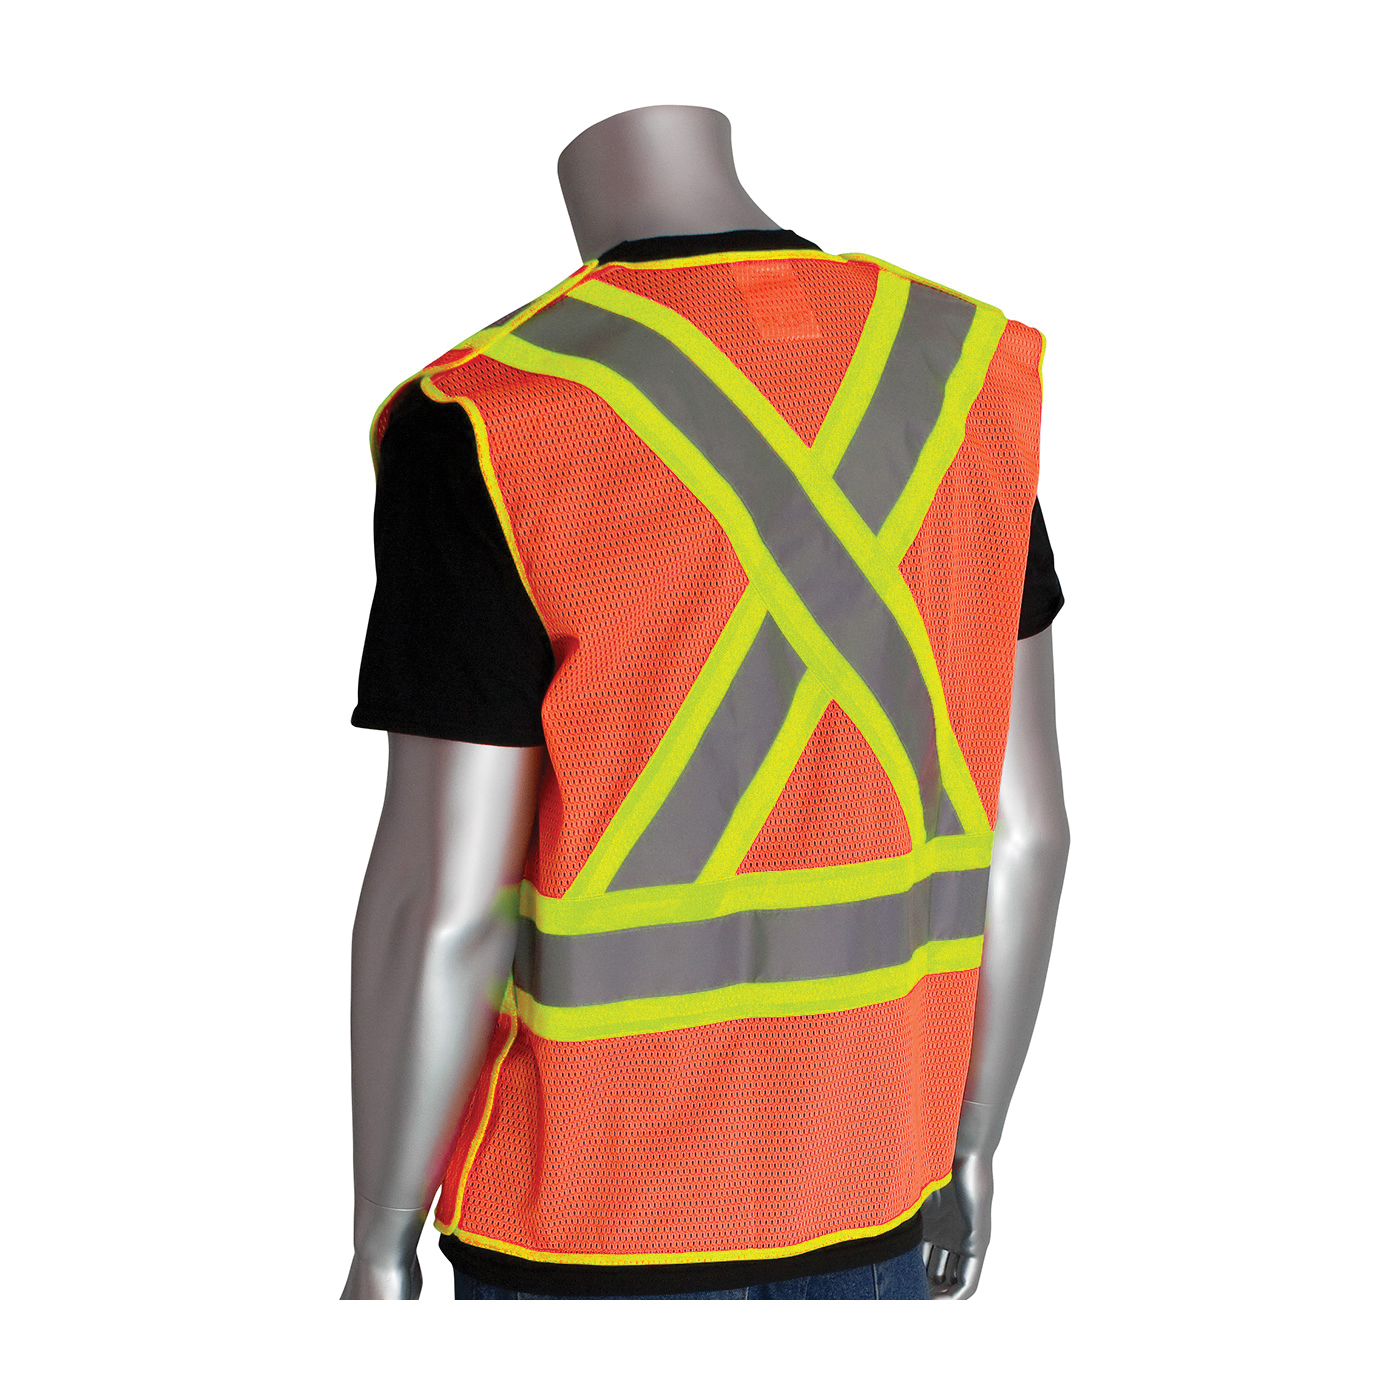 PIP® 302-0211-OR/4X 2-Tone X-Back Safety Vest, 4XL, Hi-Viz Orange, Polyester Mesh, Hook and Loop Closure, 5 Pockets, ANSI Class: Class 2, Specifications Met: ANSI 107 Type R, CAN/CSA Z96